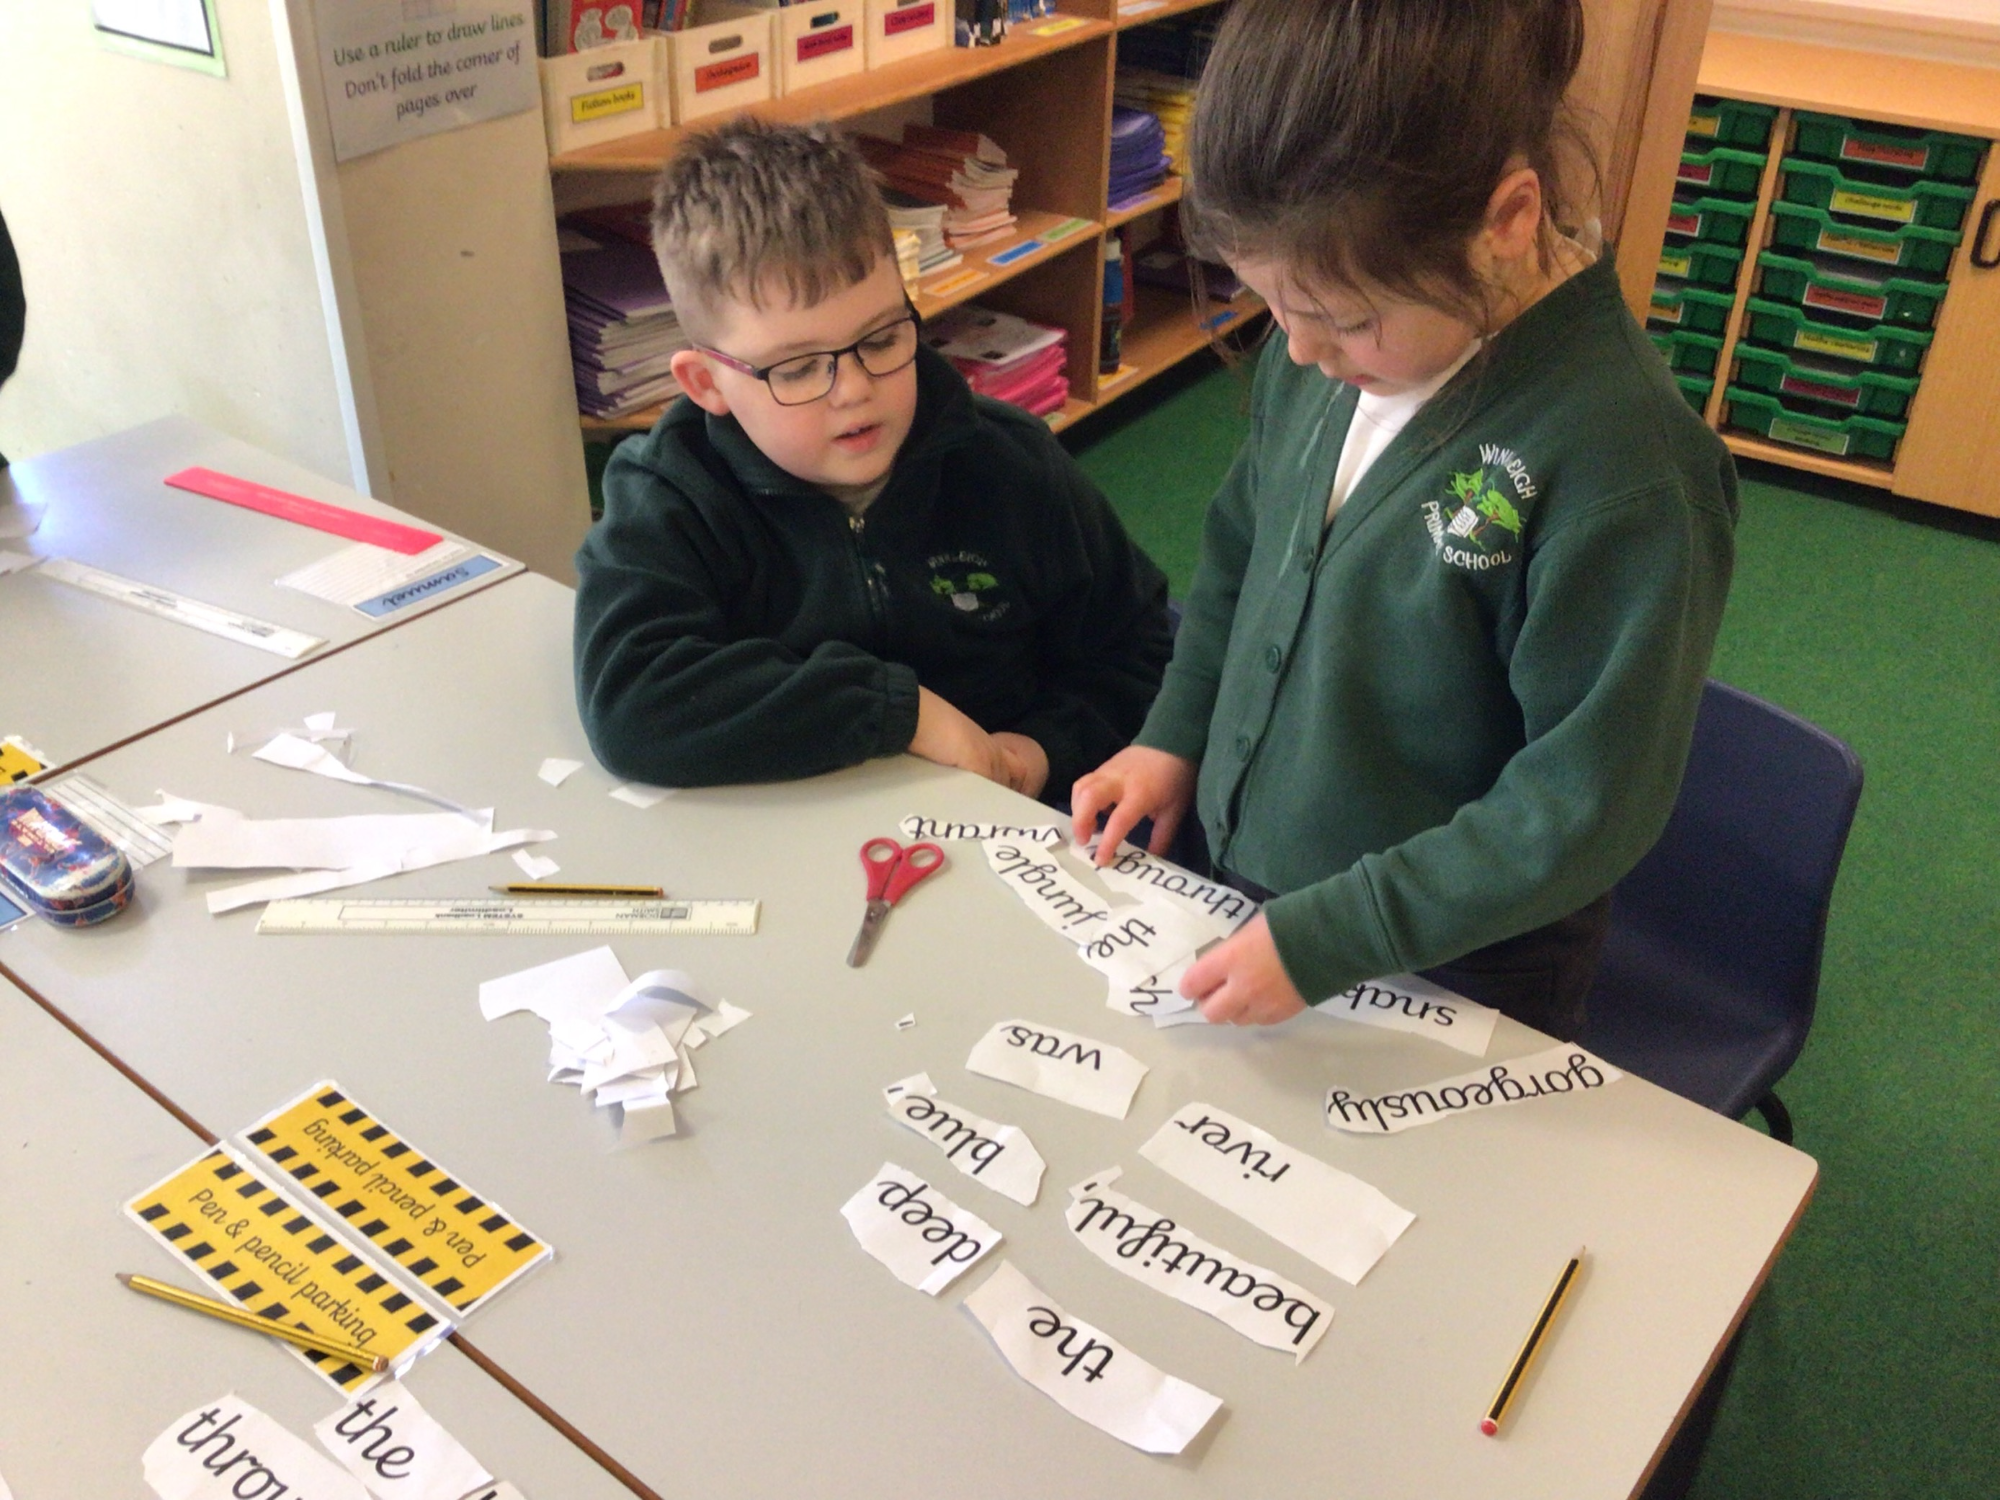 Two children using scissors to cut out words to make into sentences